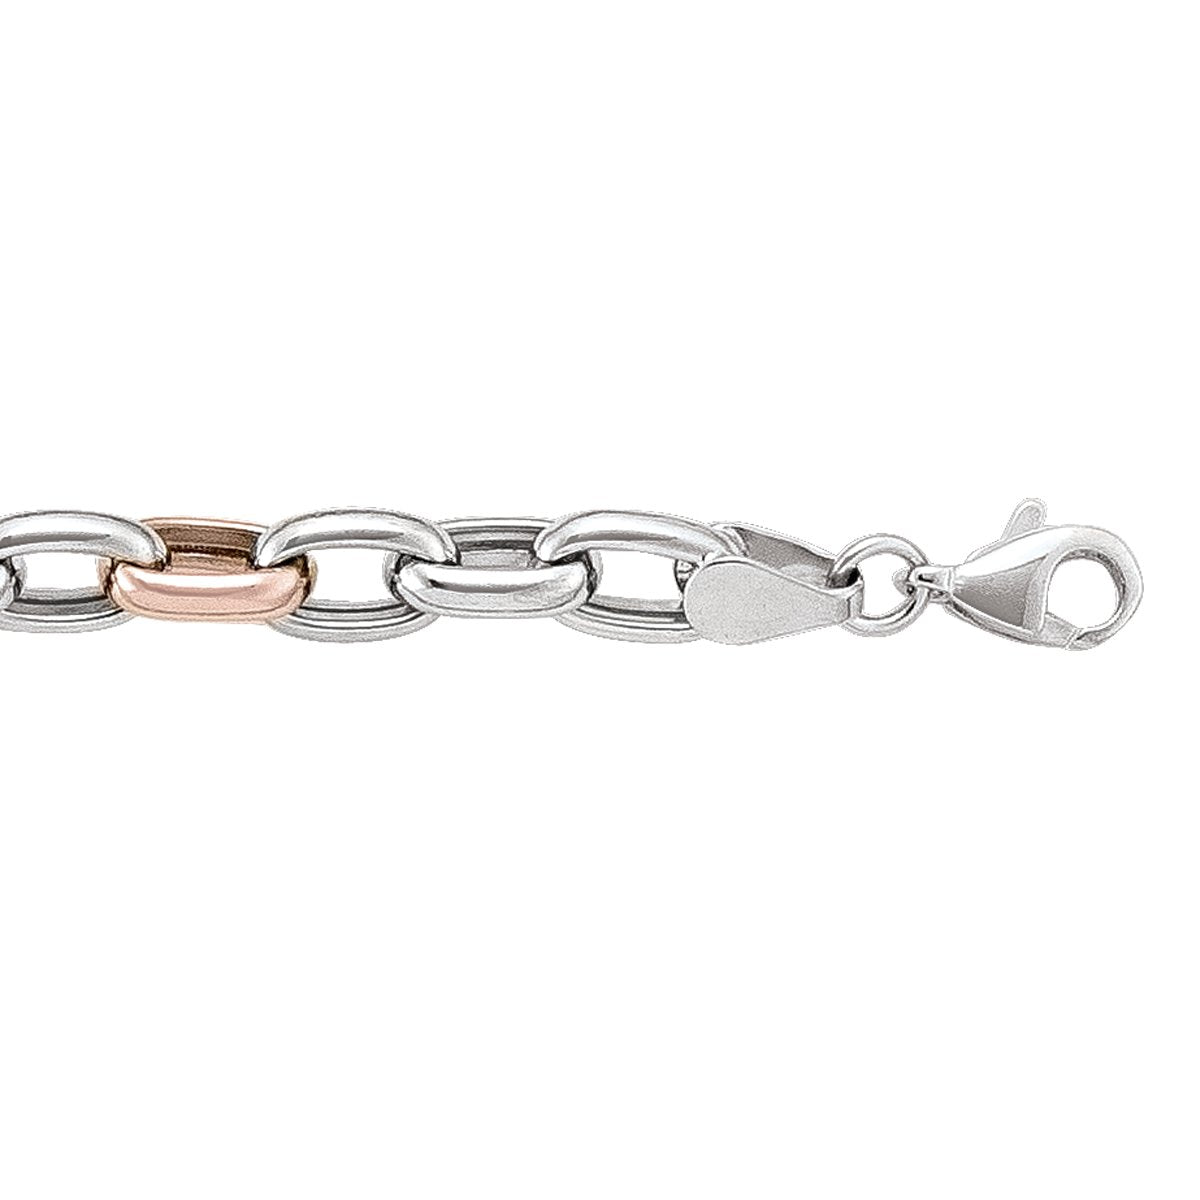 LADIES BRACELETS PINK AND WHITE GOLD FANCY HOLLOW LINK 